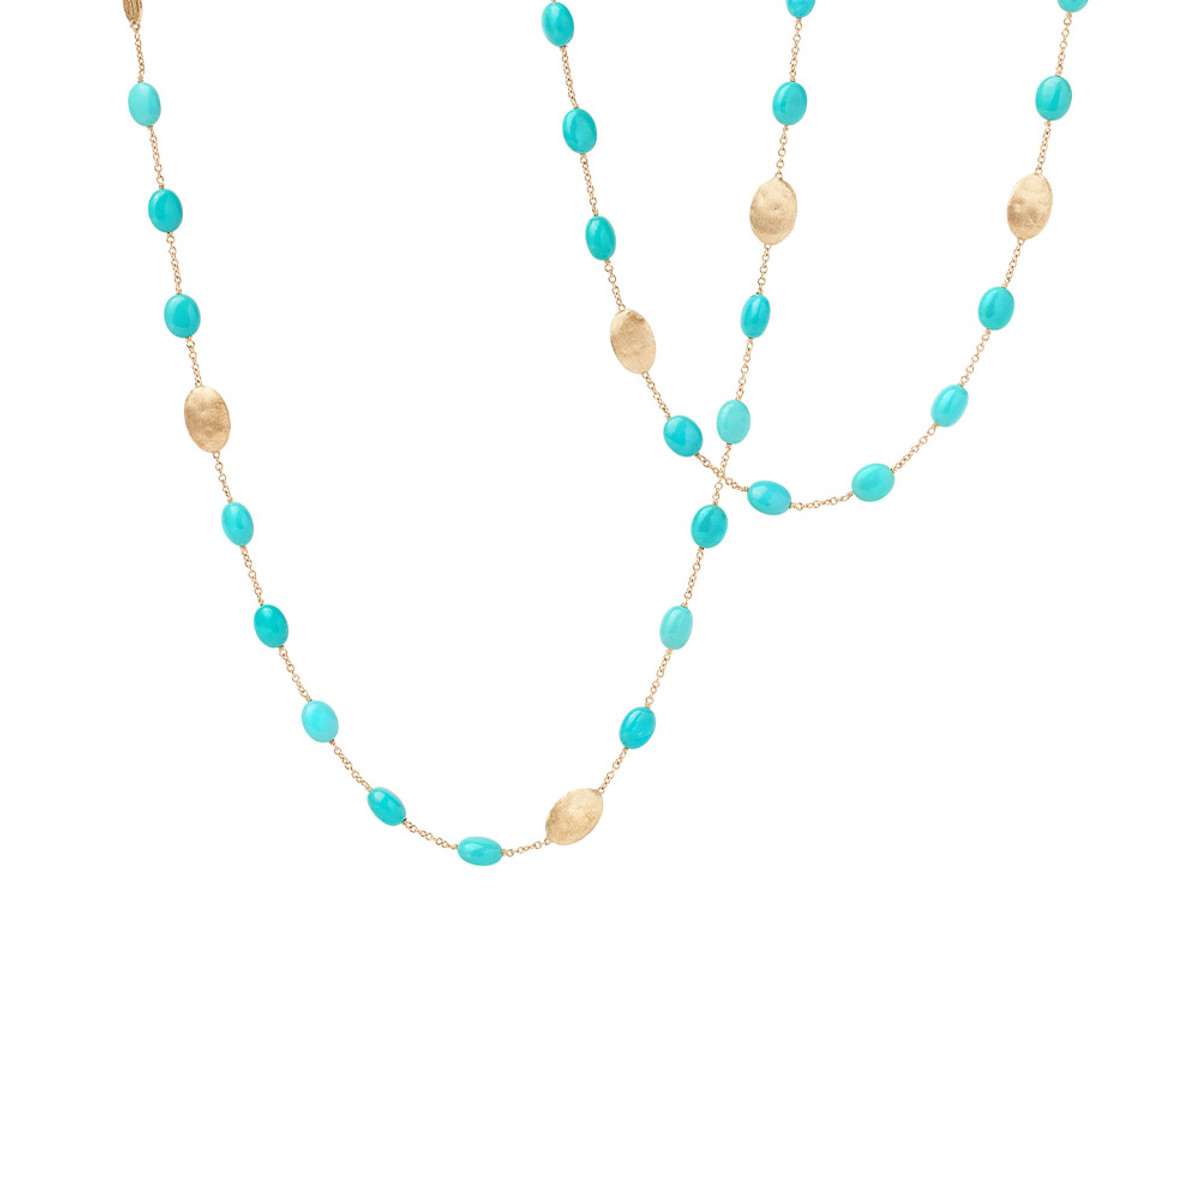 Marco Bicego Siviglia 18K Yellow Gold Long  Necklace  with Turquoise-61199